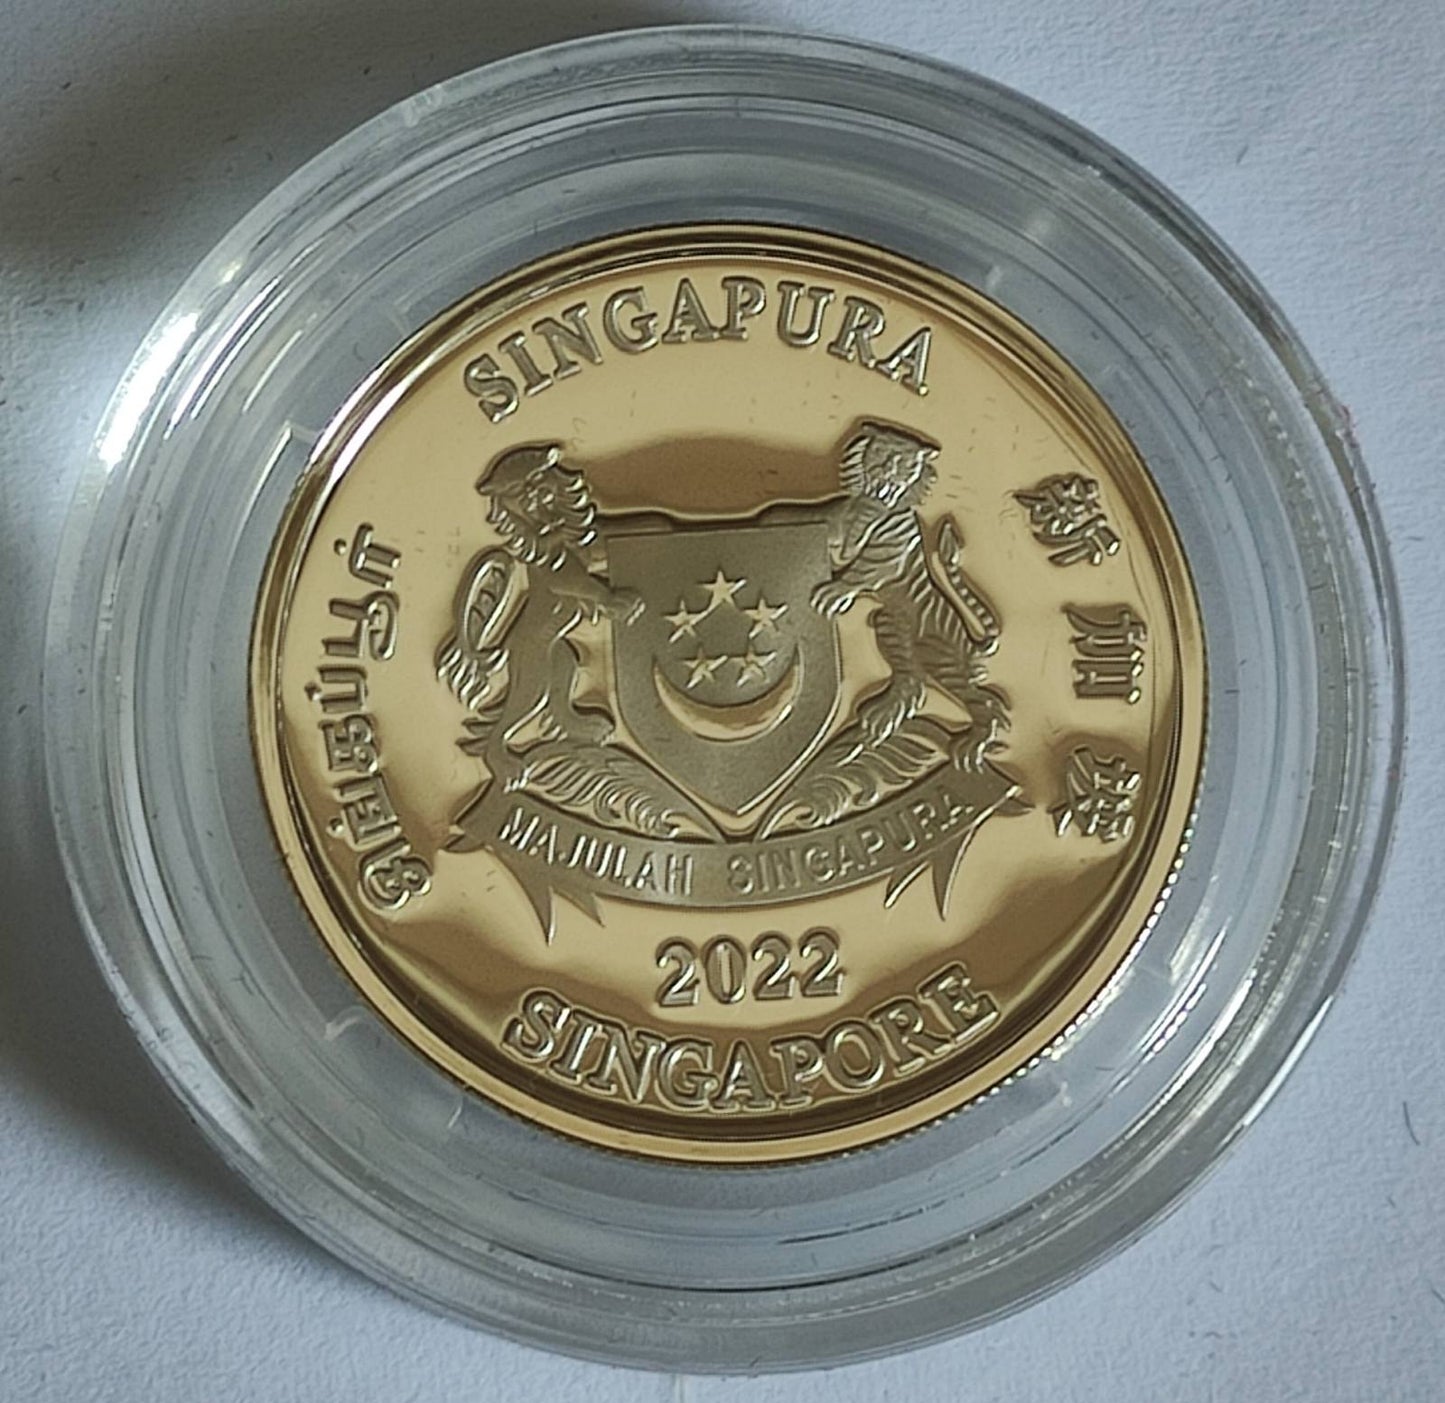 2022 Singapore Lunar Tiger 1/4 oz Prooflike Silver Coin in Capsule with Case and COA